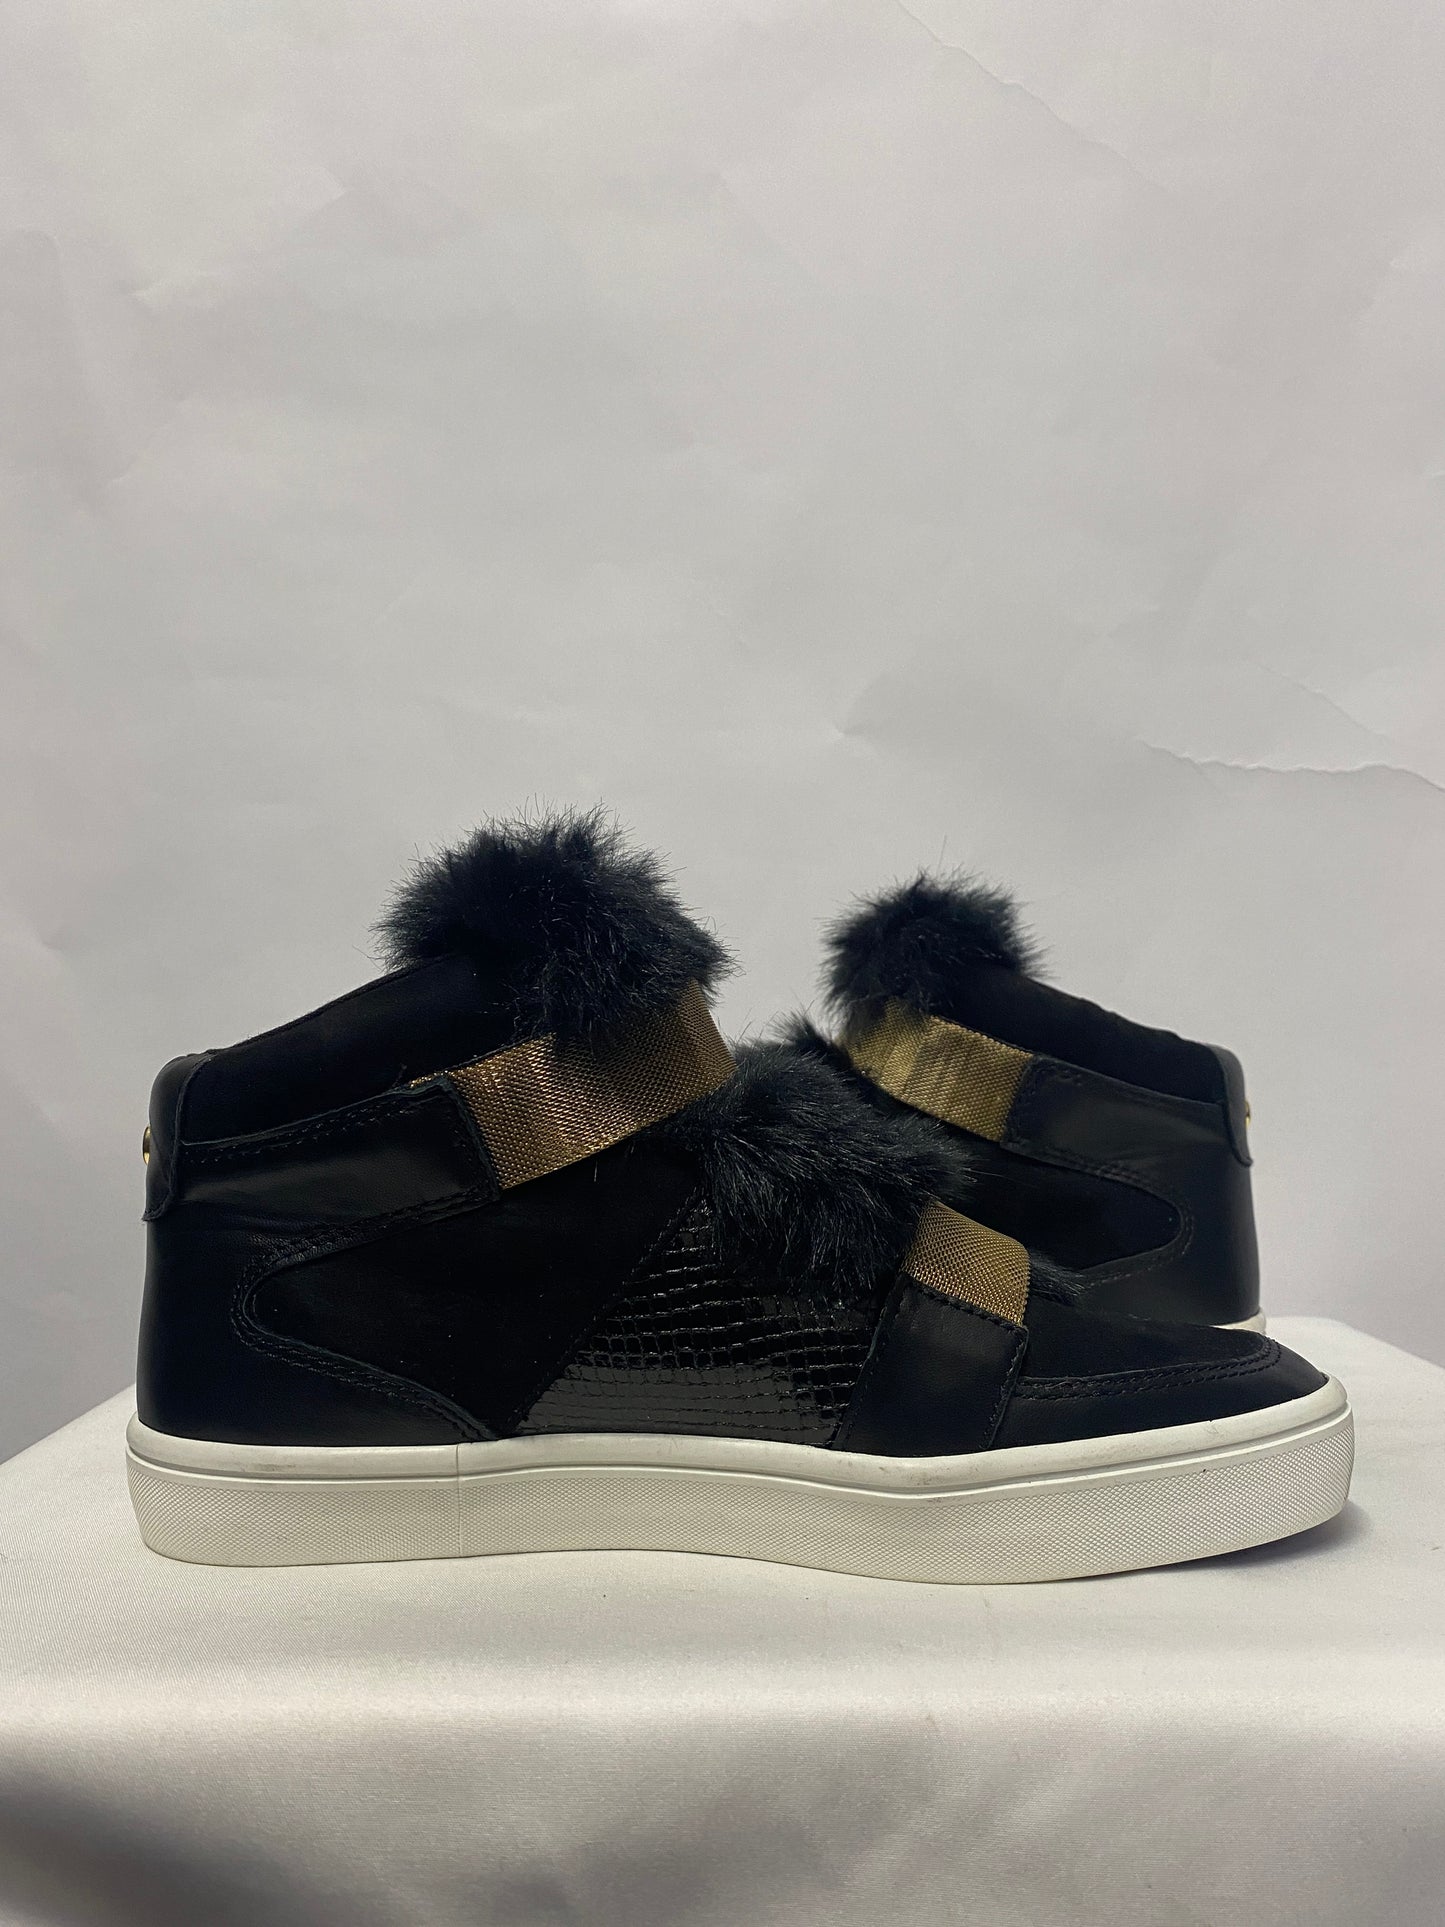 Carvela Kurt Geiger Black and Gold Leather and Faux Fur Hi-top Trainers 5 BNWB